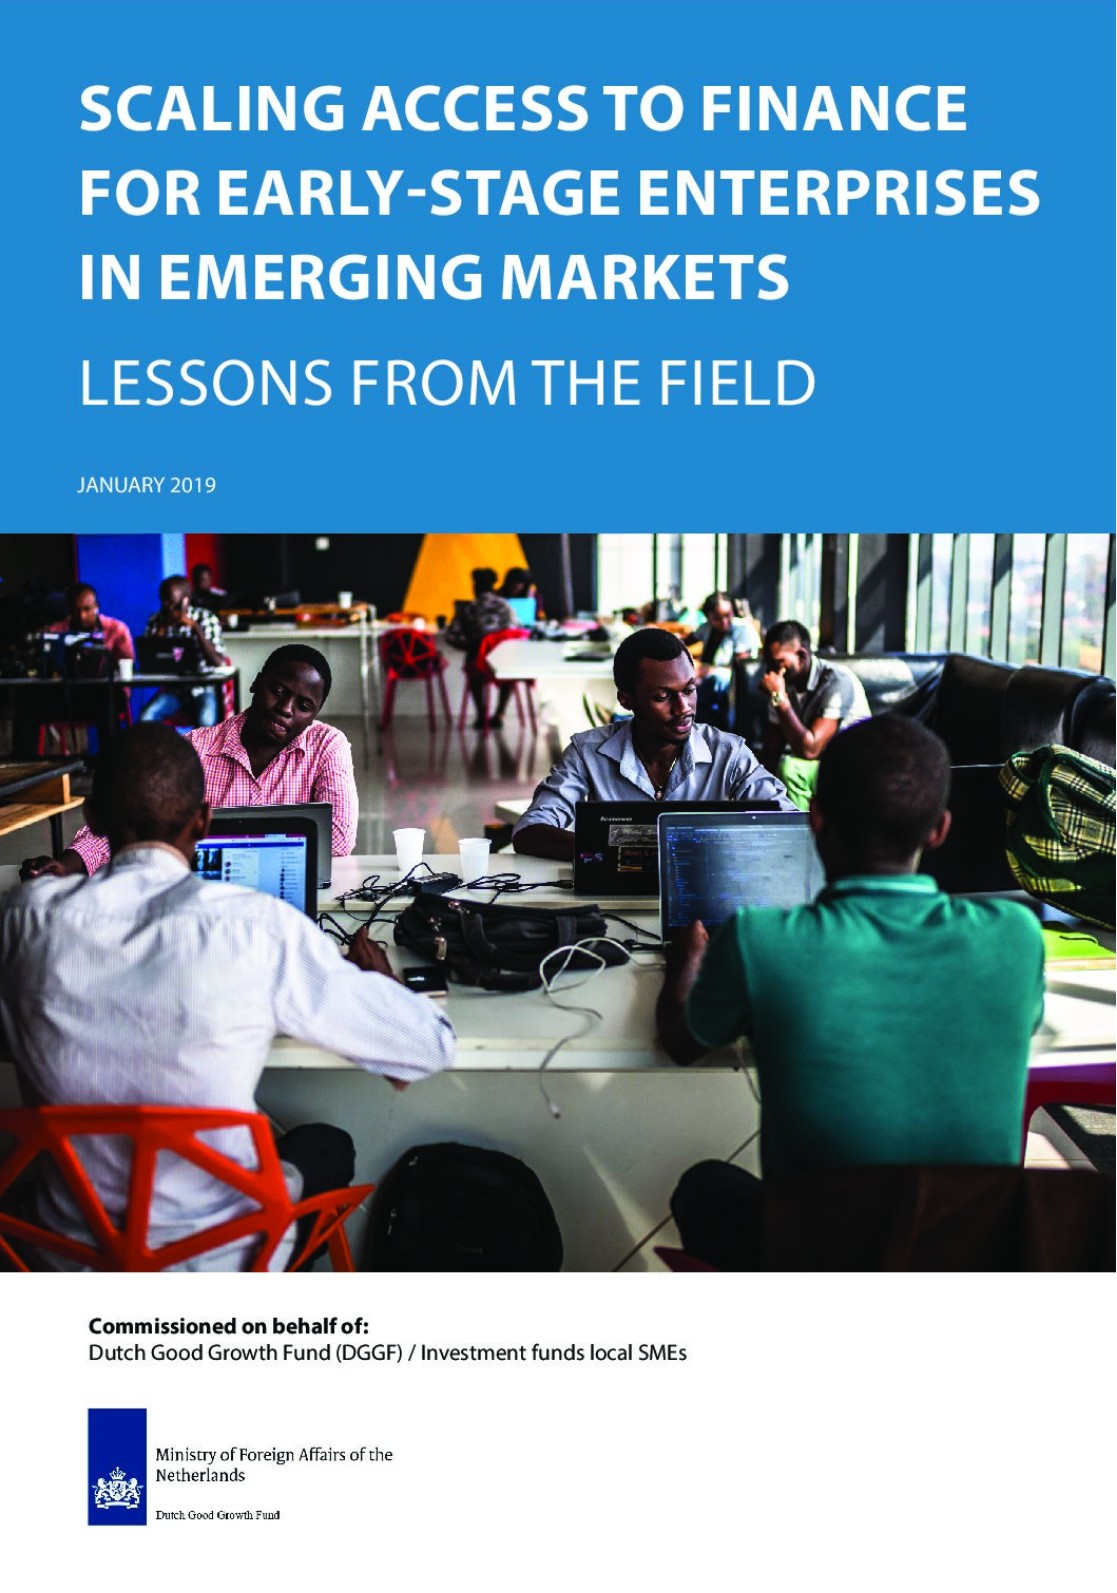 Scaling Access To Finance For Early Stage Enterprises in Emerging Markets pdf - Iungo capital downloads